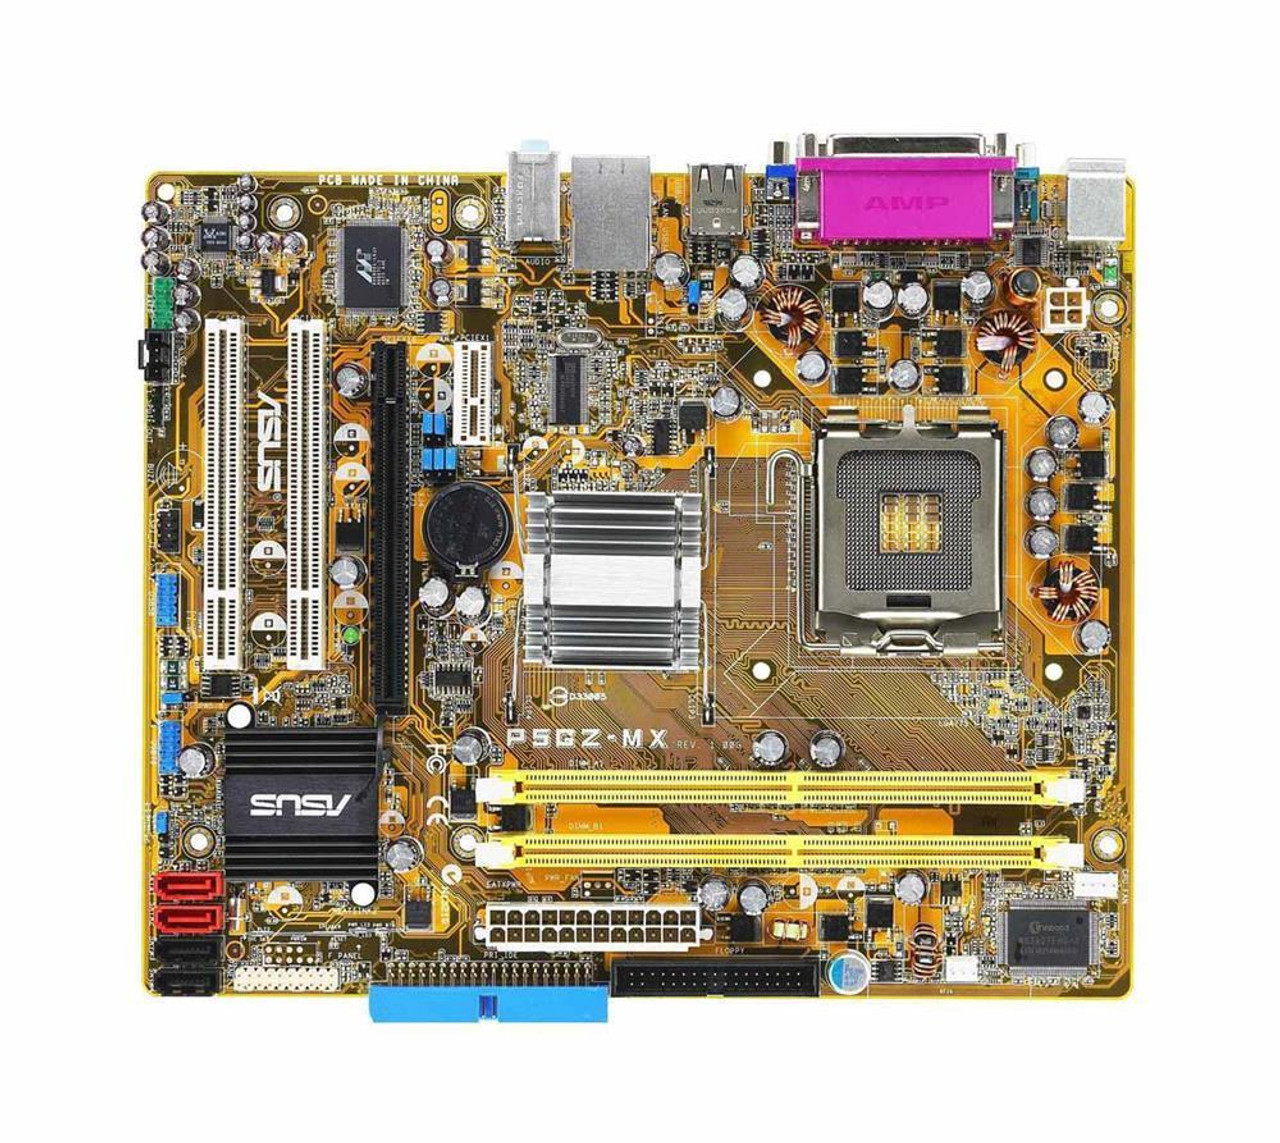 60MBB570A06 ASUS P5gz-mx Motherboard 